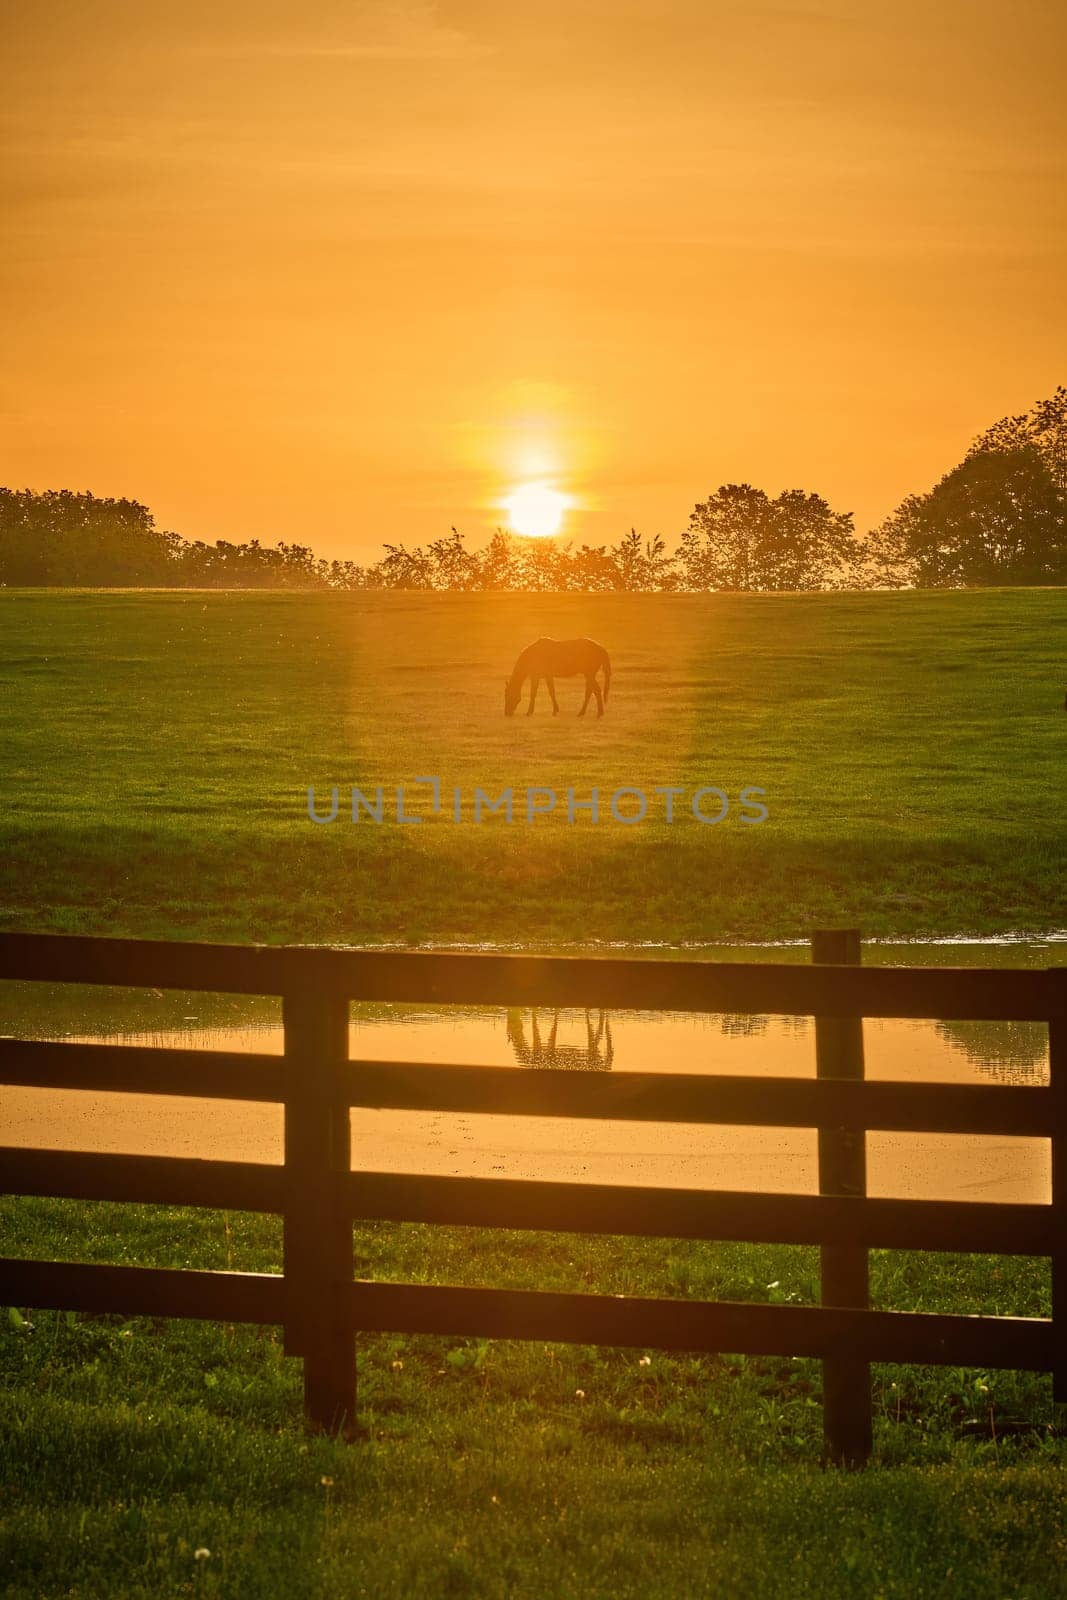 Single horse grazing in a field with rising morning sun with flare. by patrickstock